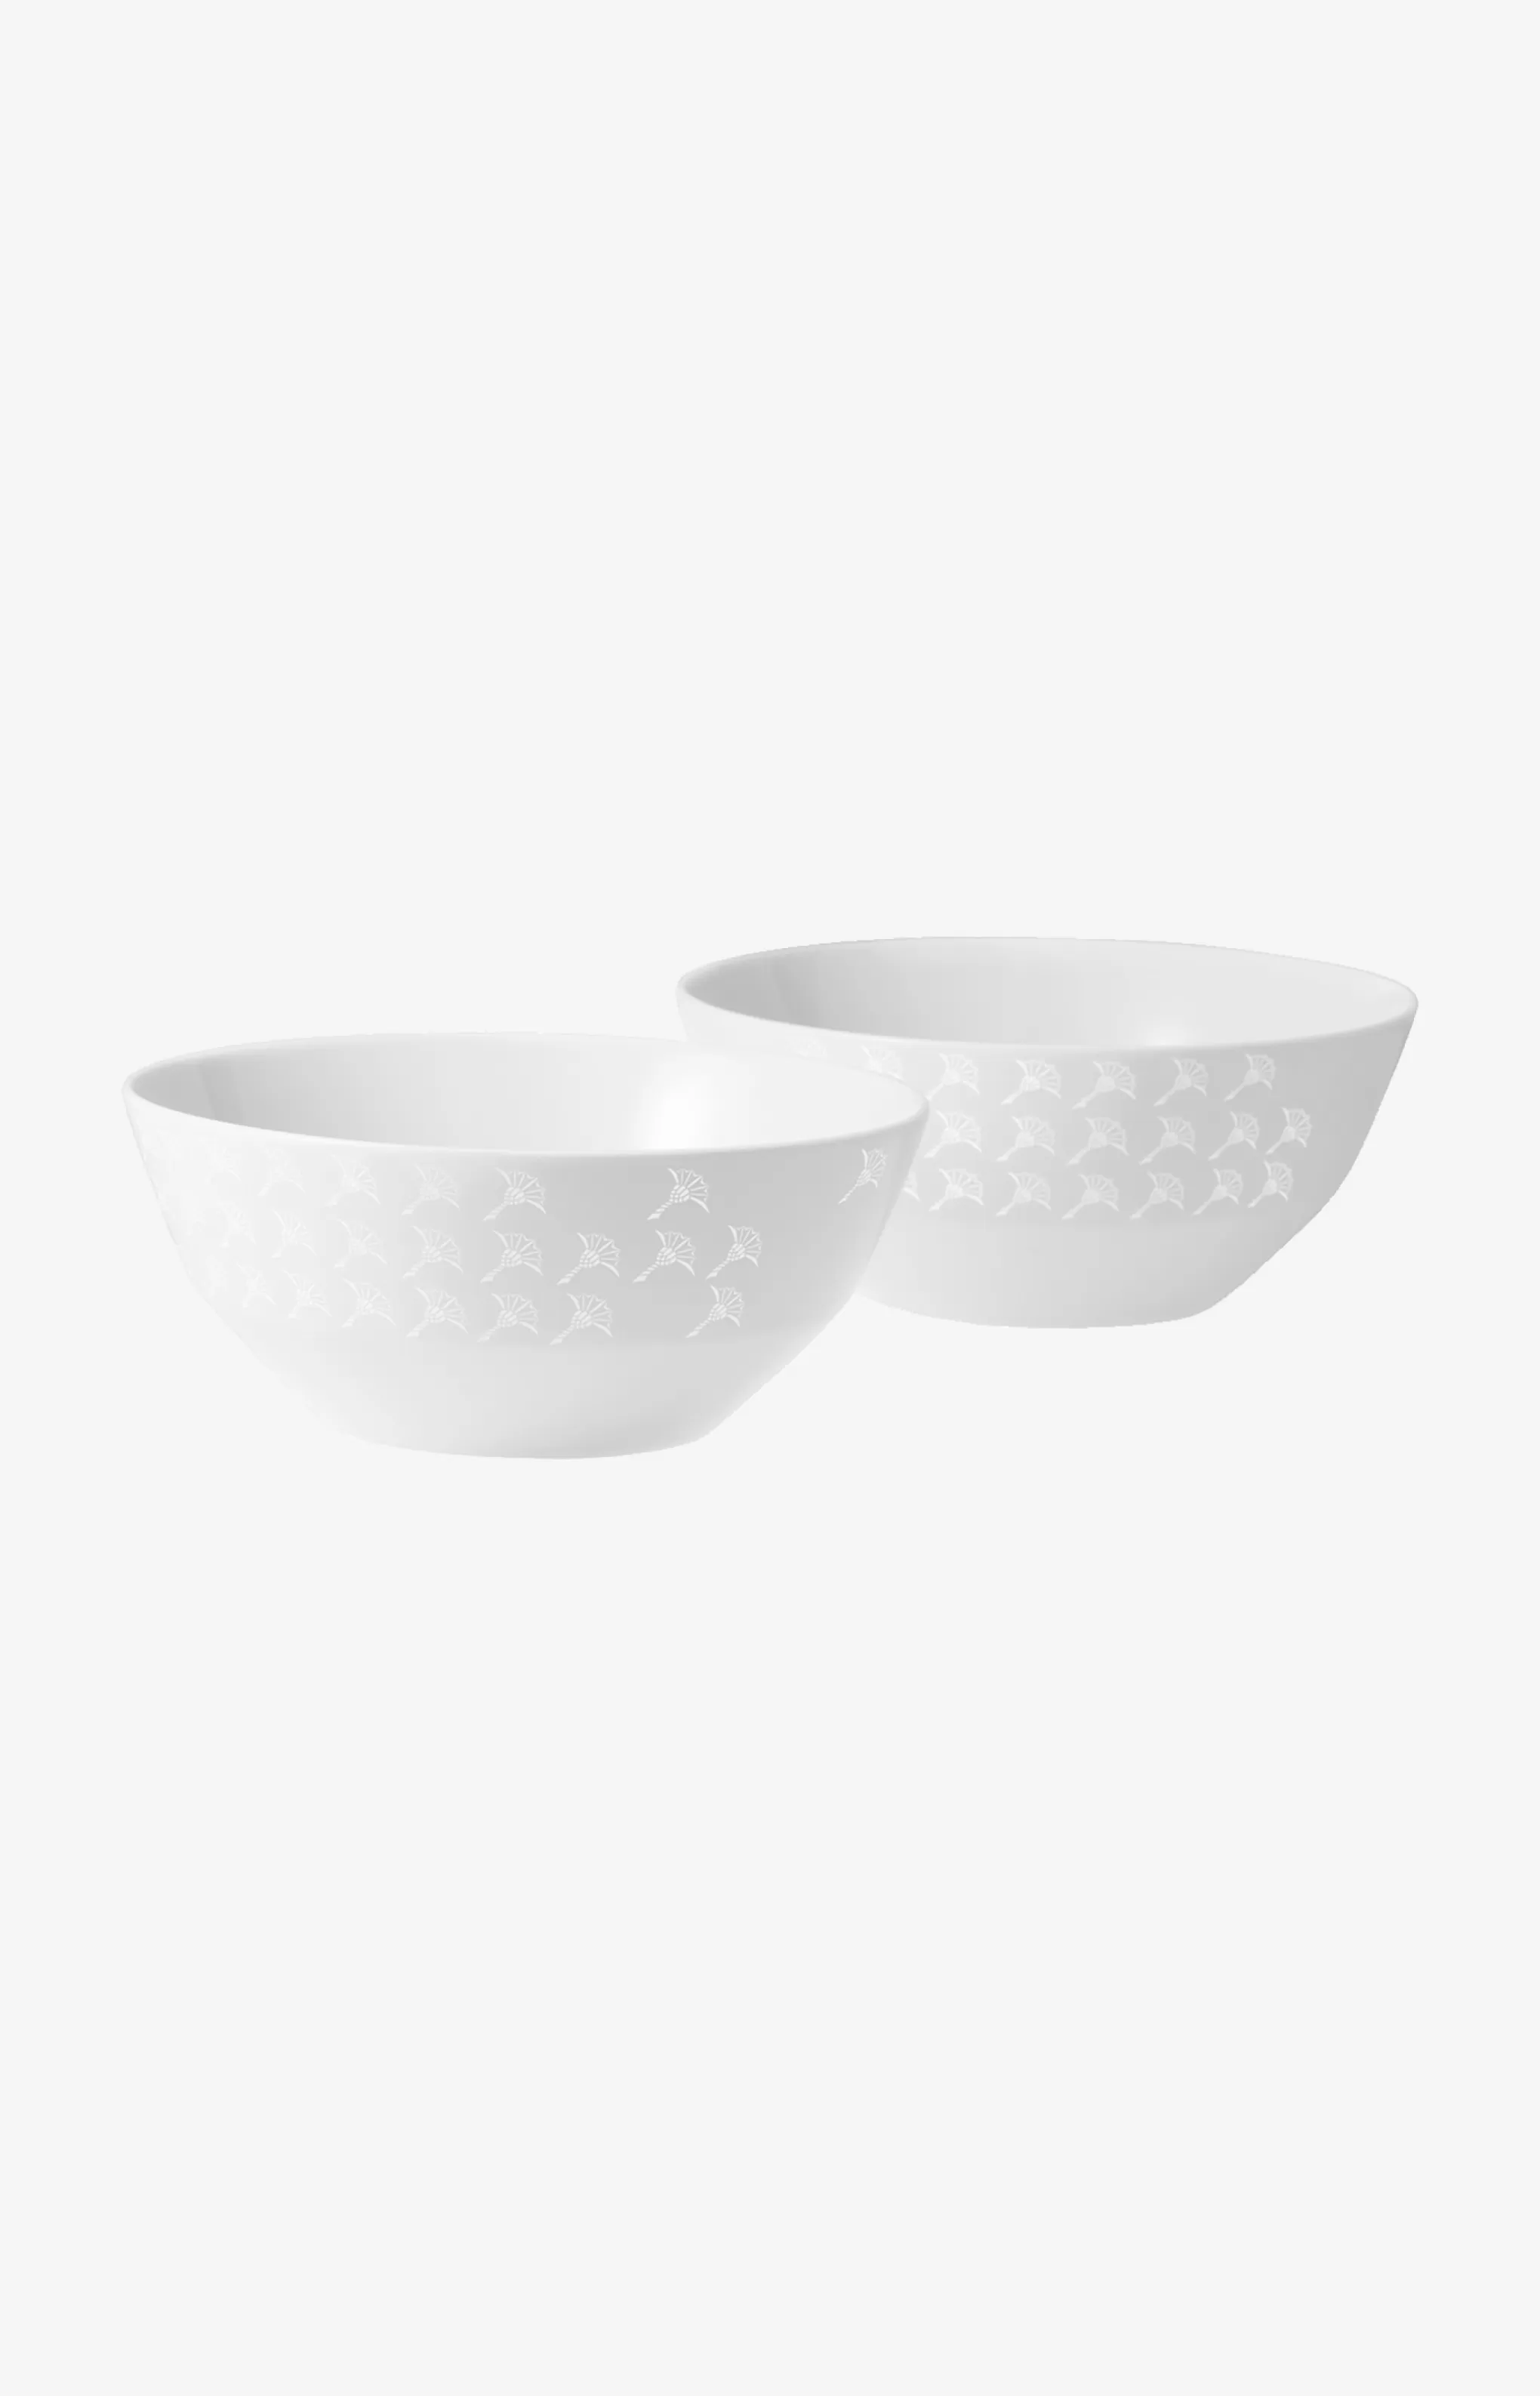 Tableware | Discover Everything*JOOP Tableware | Discover Everything Faded Cornflower Bowl 13 cm - Set of 2 in